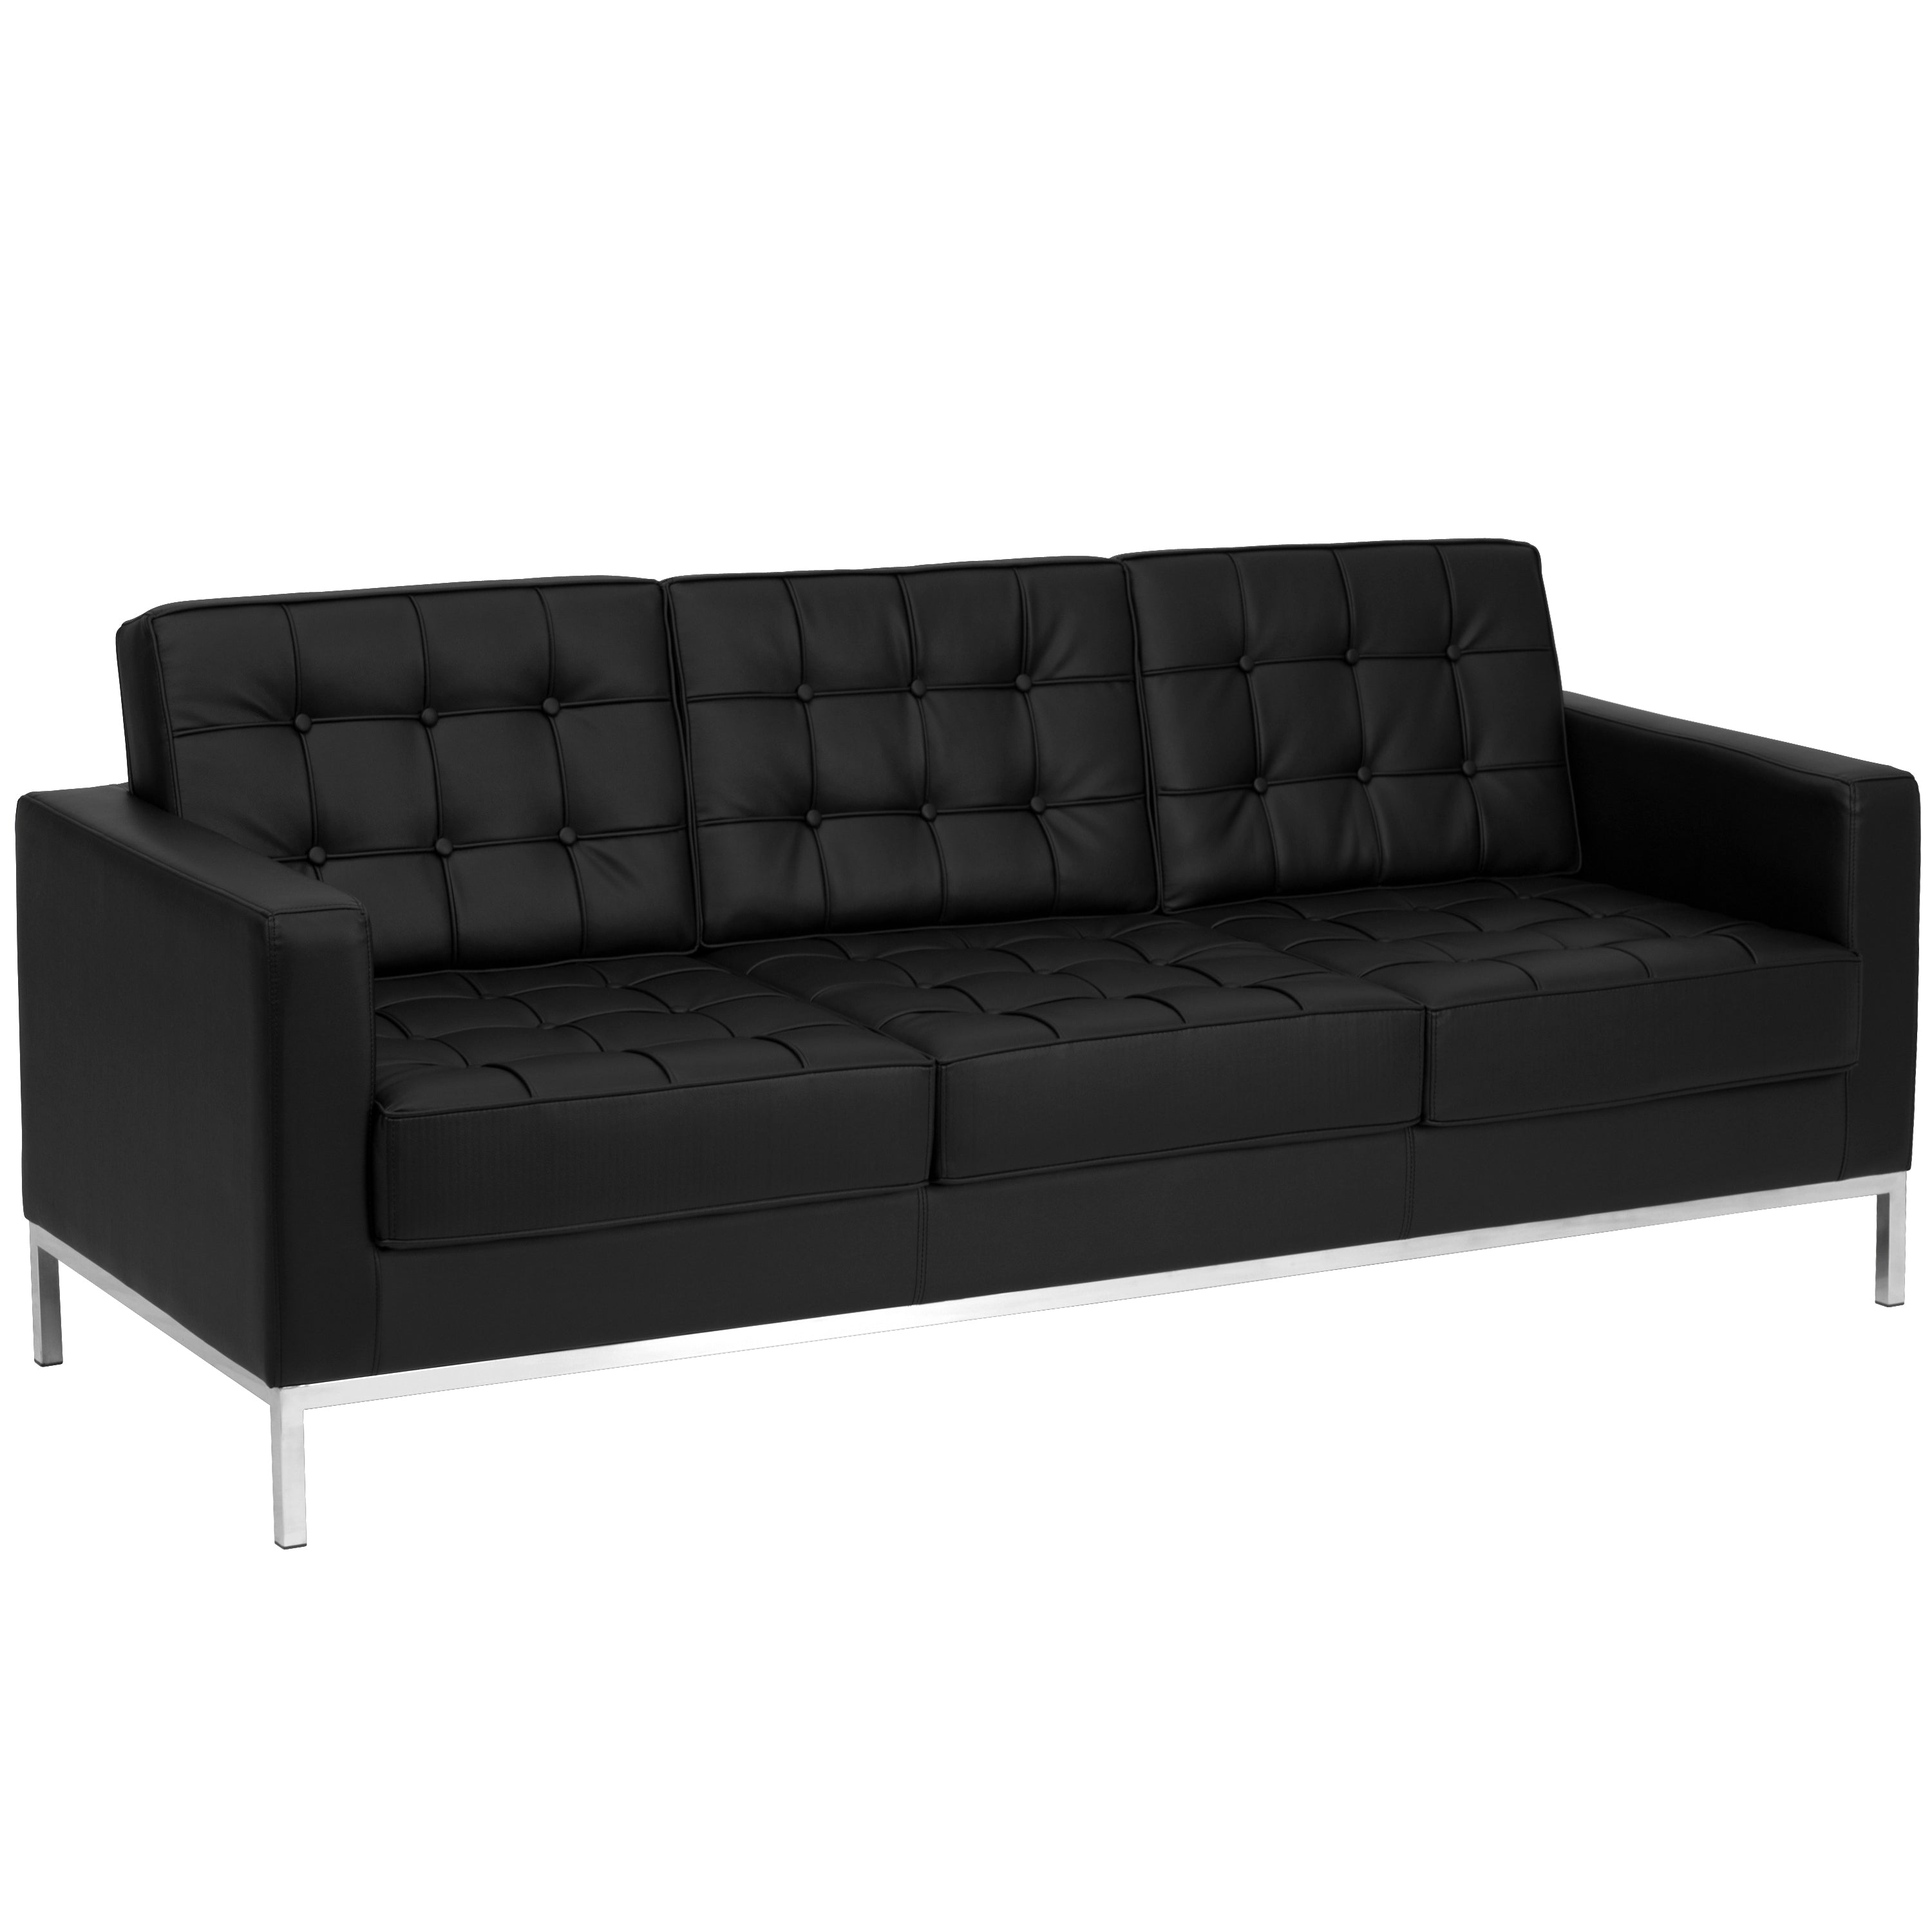 HERCULES Lacey Series Contemporary Button Tufted LeatherSoft Sofa with Integrated Stainless Steel Frame-Reception Sofa-Flash Furniture-Wall2Wall Furnishings